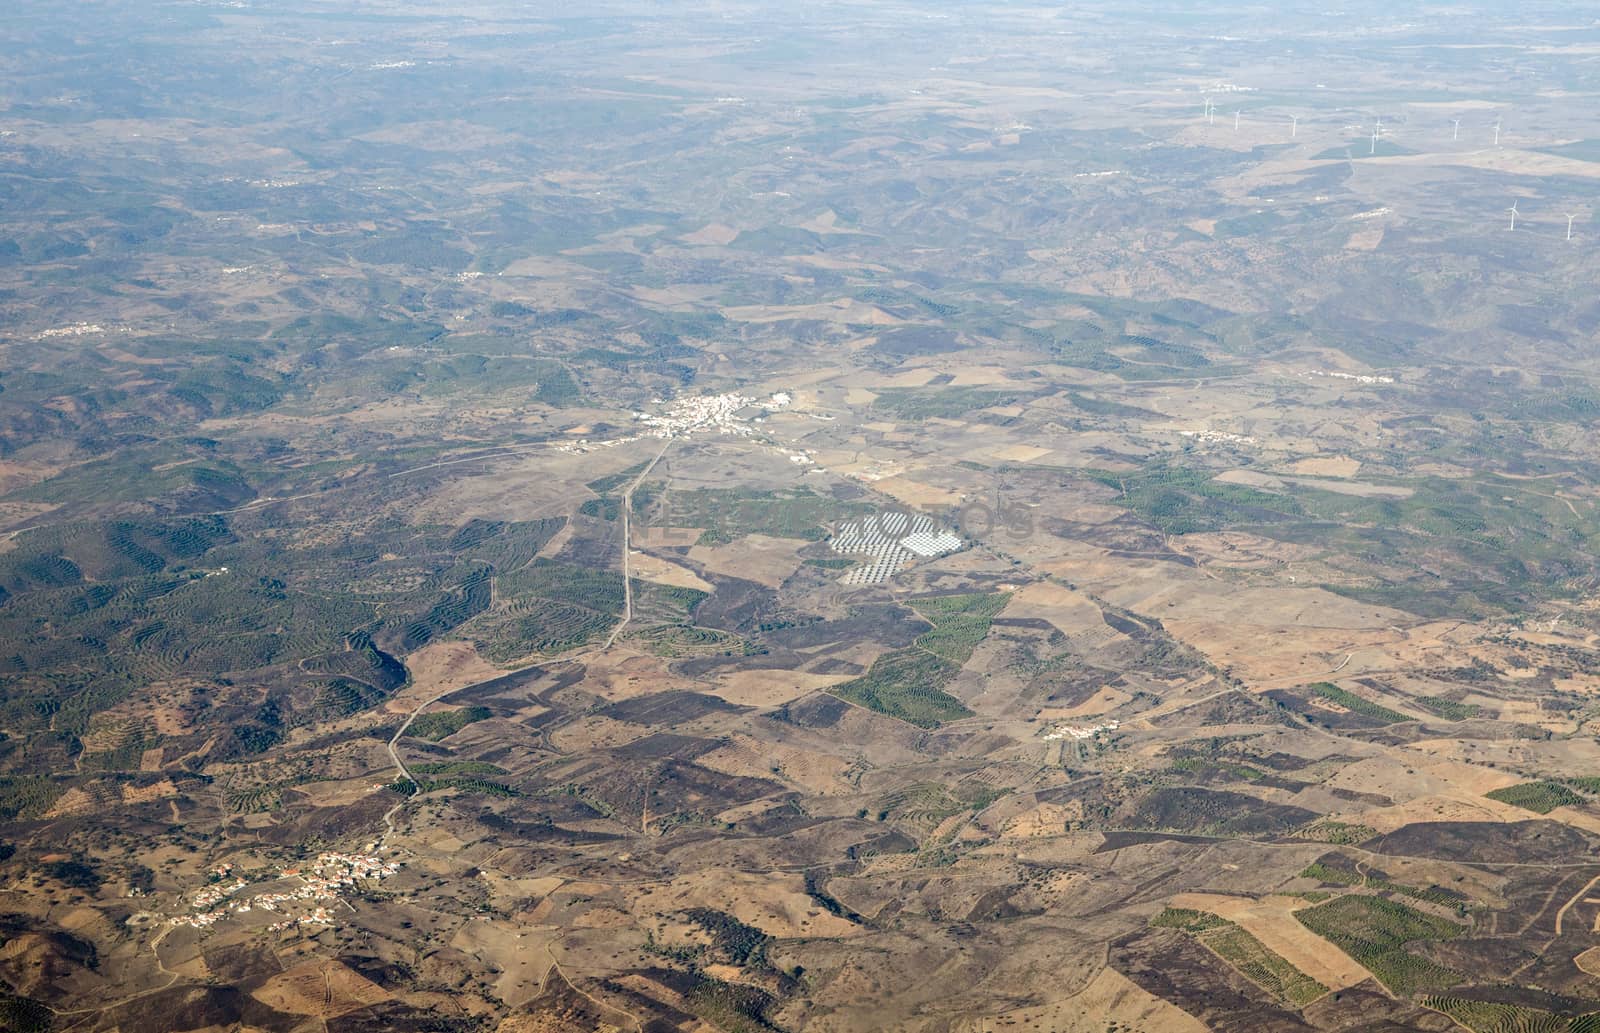 Aerial view of the town of Martim Longo in the Alcoutim region of Portugal.  The area is supplied with renewable energy with a large solar farm and many wind turbines nearby.  